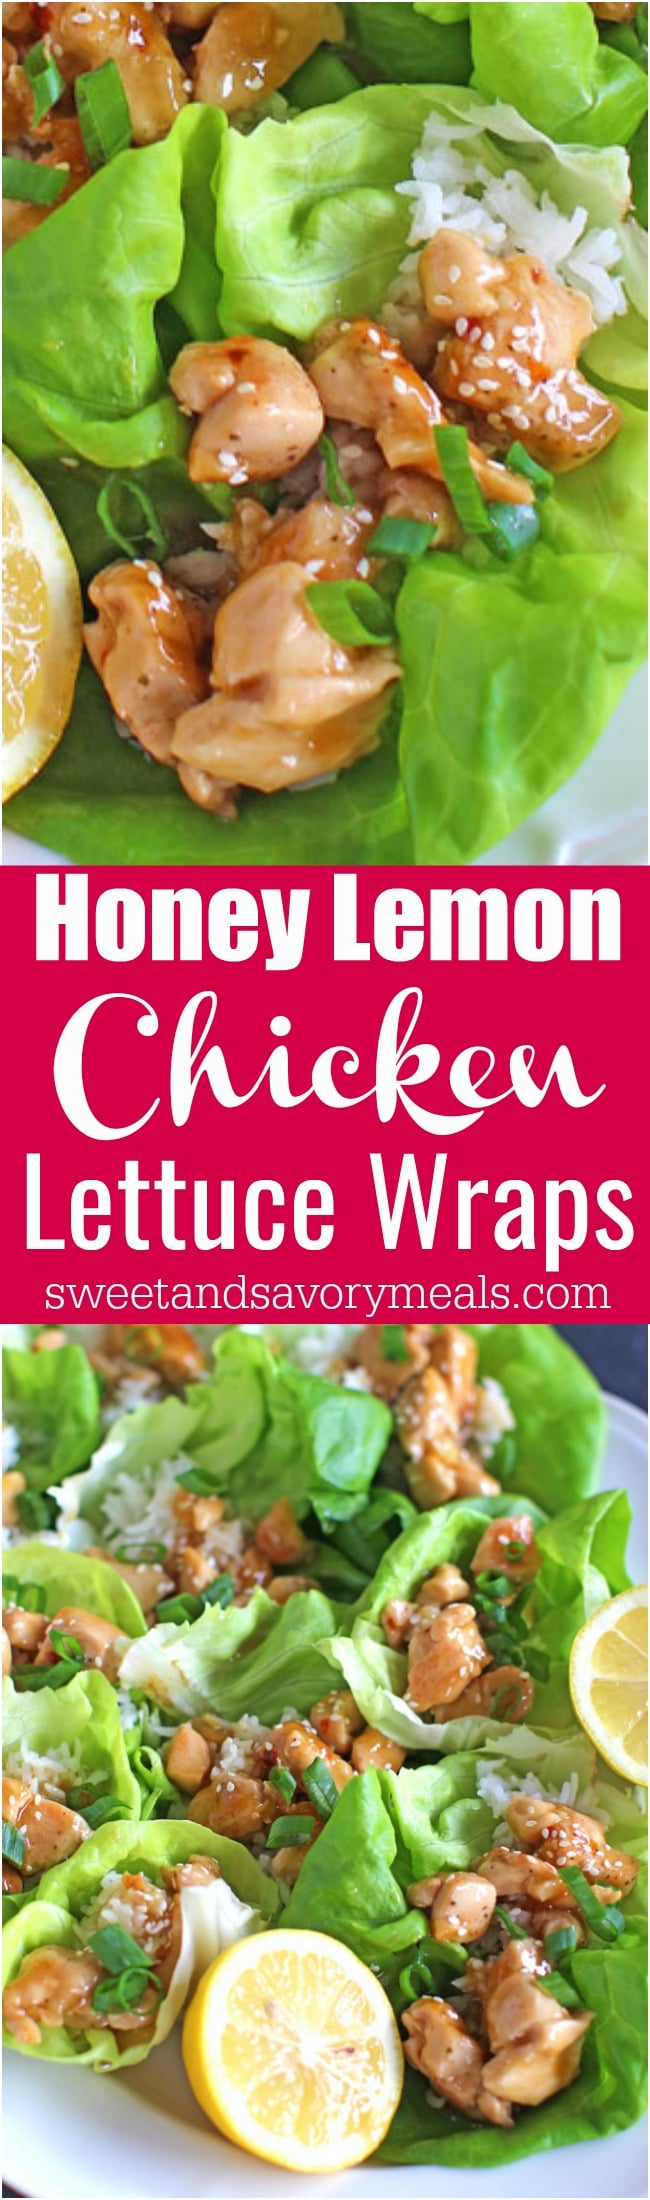 Honey Lemon Chicken Lettuce Wraps are such a great appetizer, snack or the perfect healthier dinner. Full of flavor and light, ready in 30 minutes.